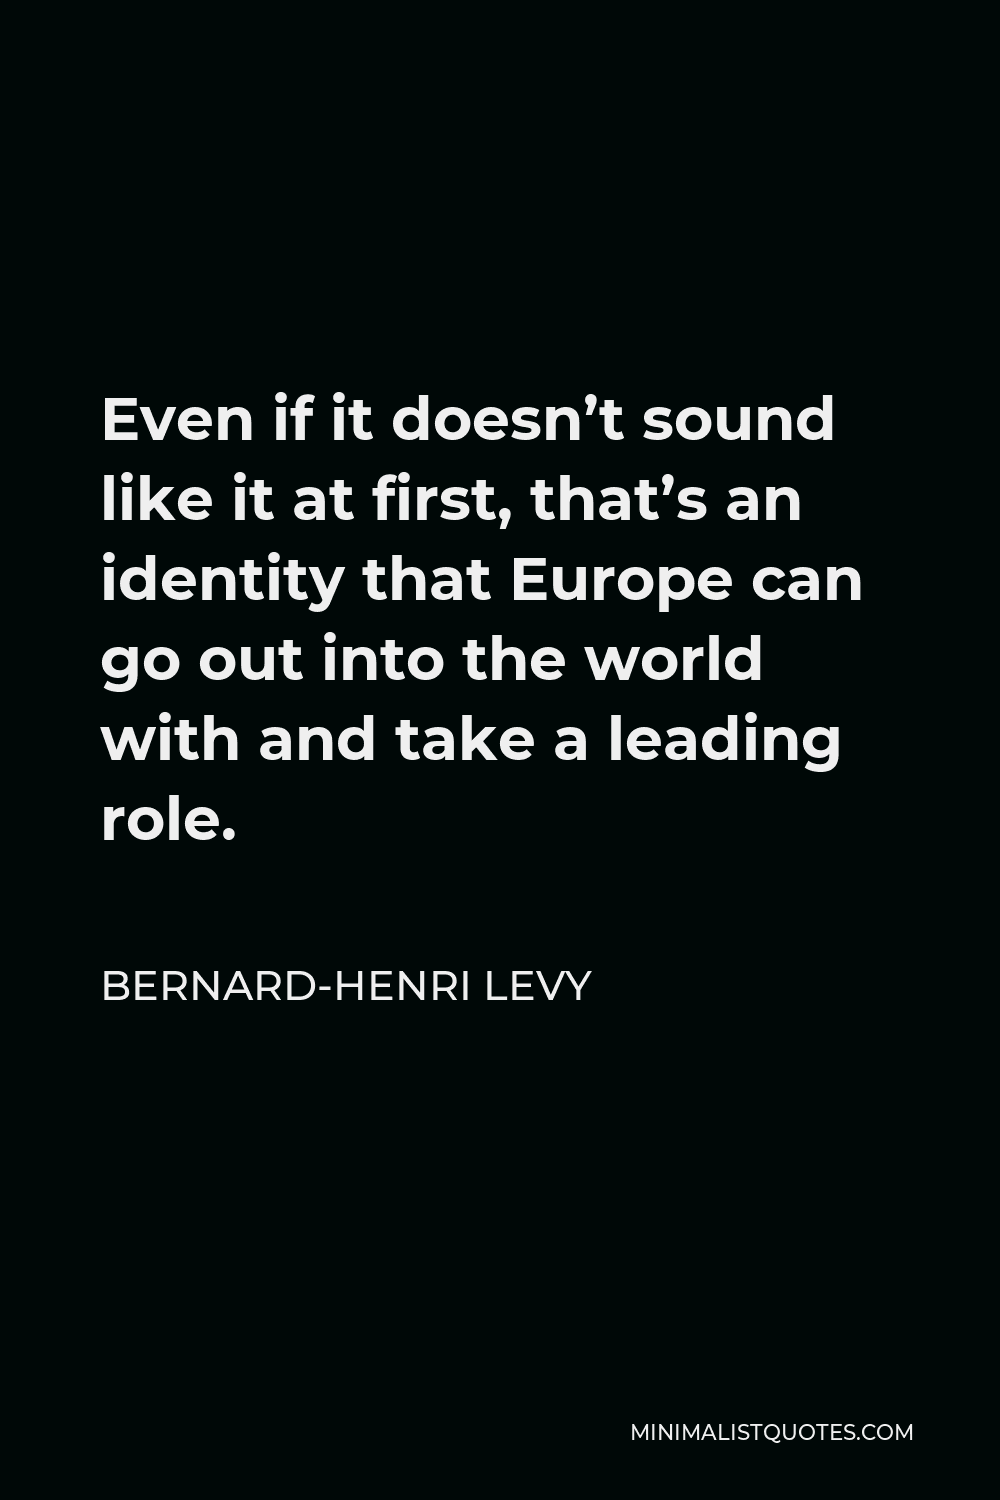 Bernard-Henri Levy Quote - Even if it doesn’t sound like it at first, that’s an identity that Europe can go out into the world with and take a leading role.